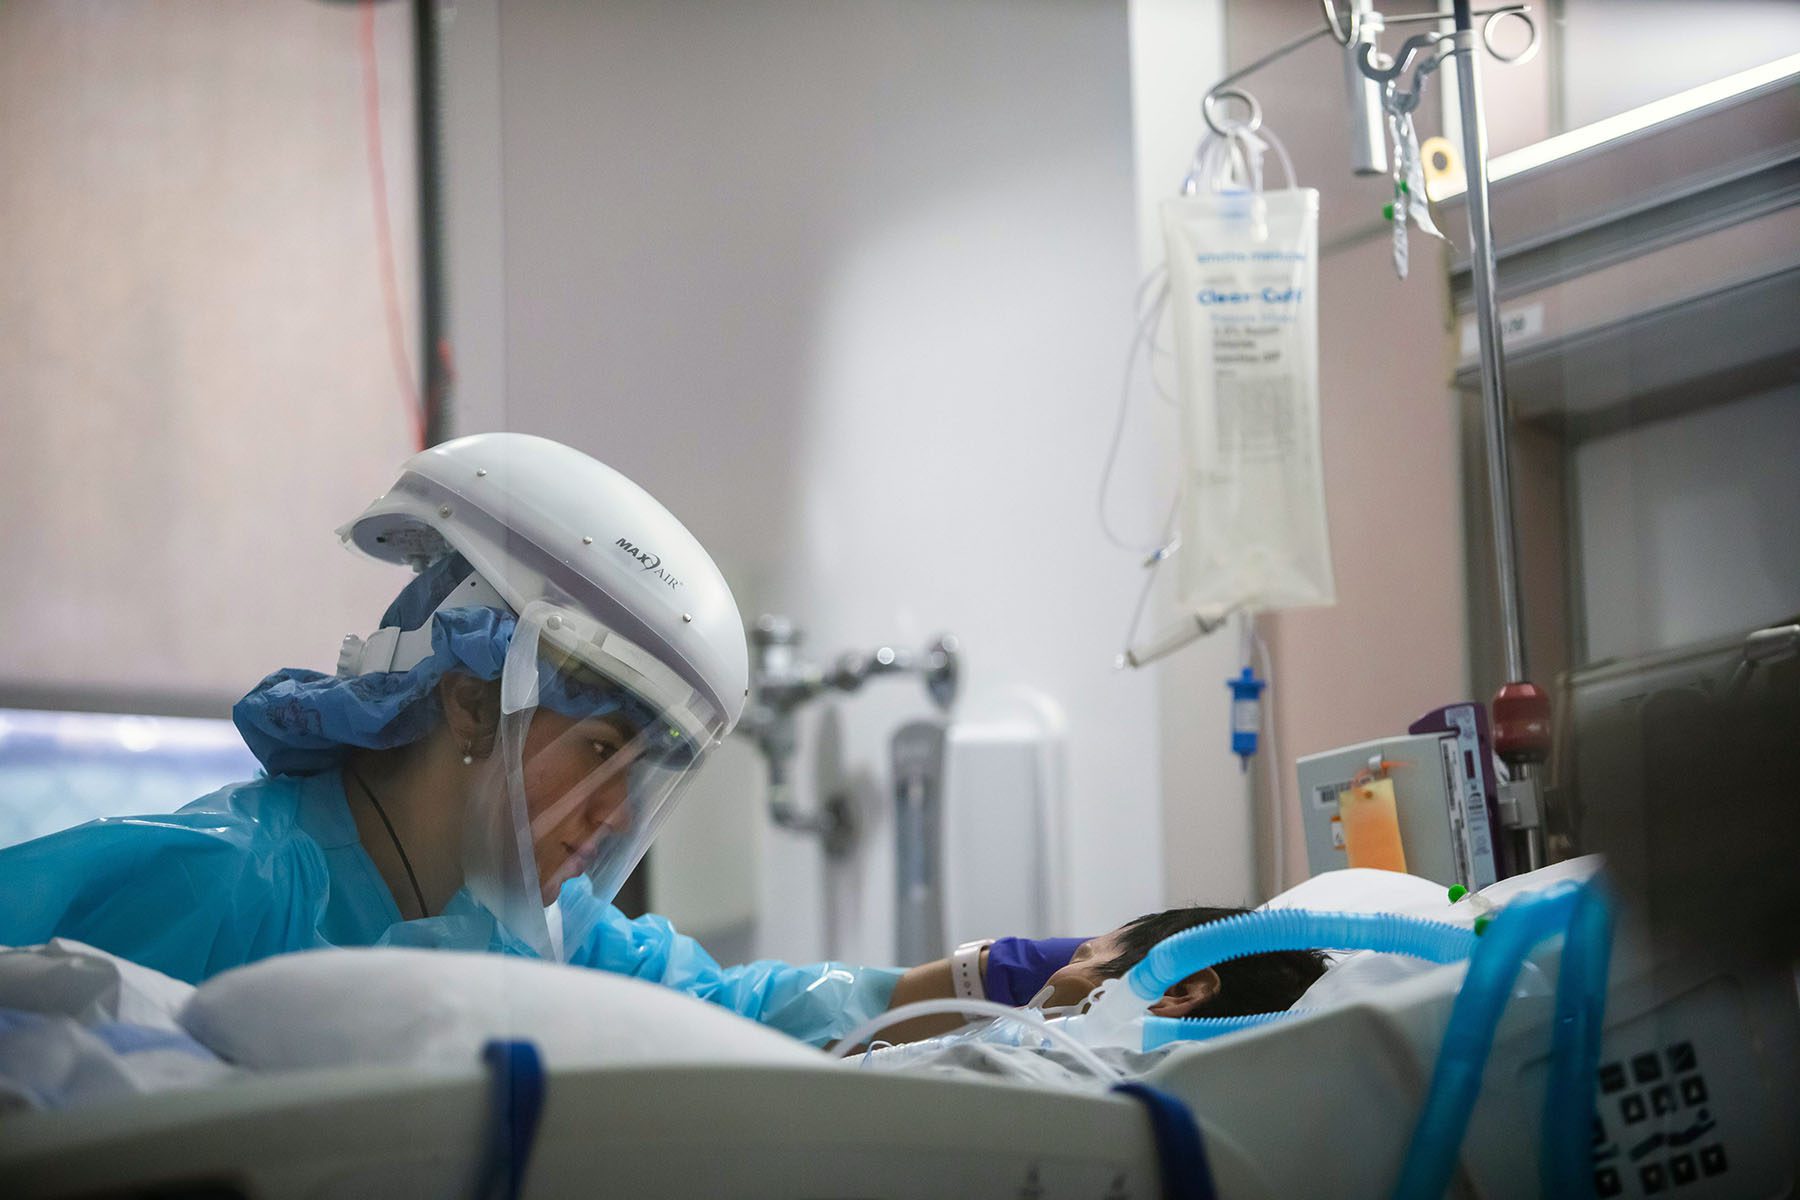 A nurse wearing PPE cares for a COVID-19 patient in an Intensive Care Unit.